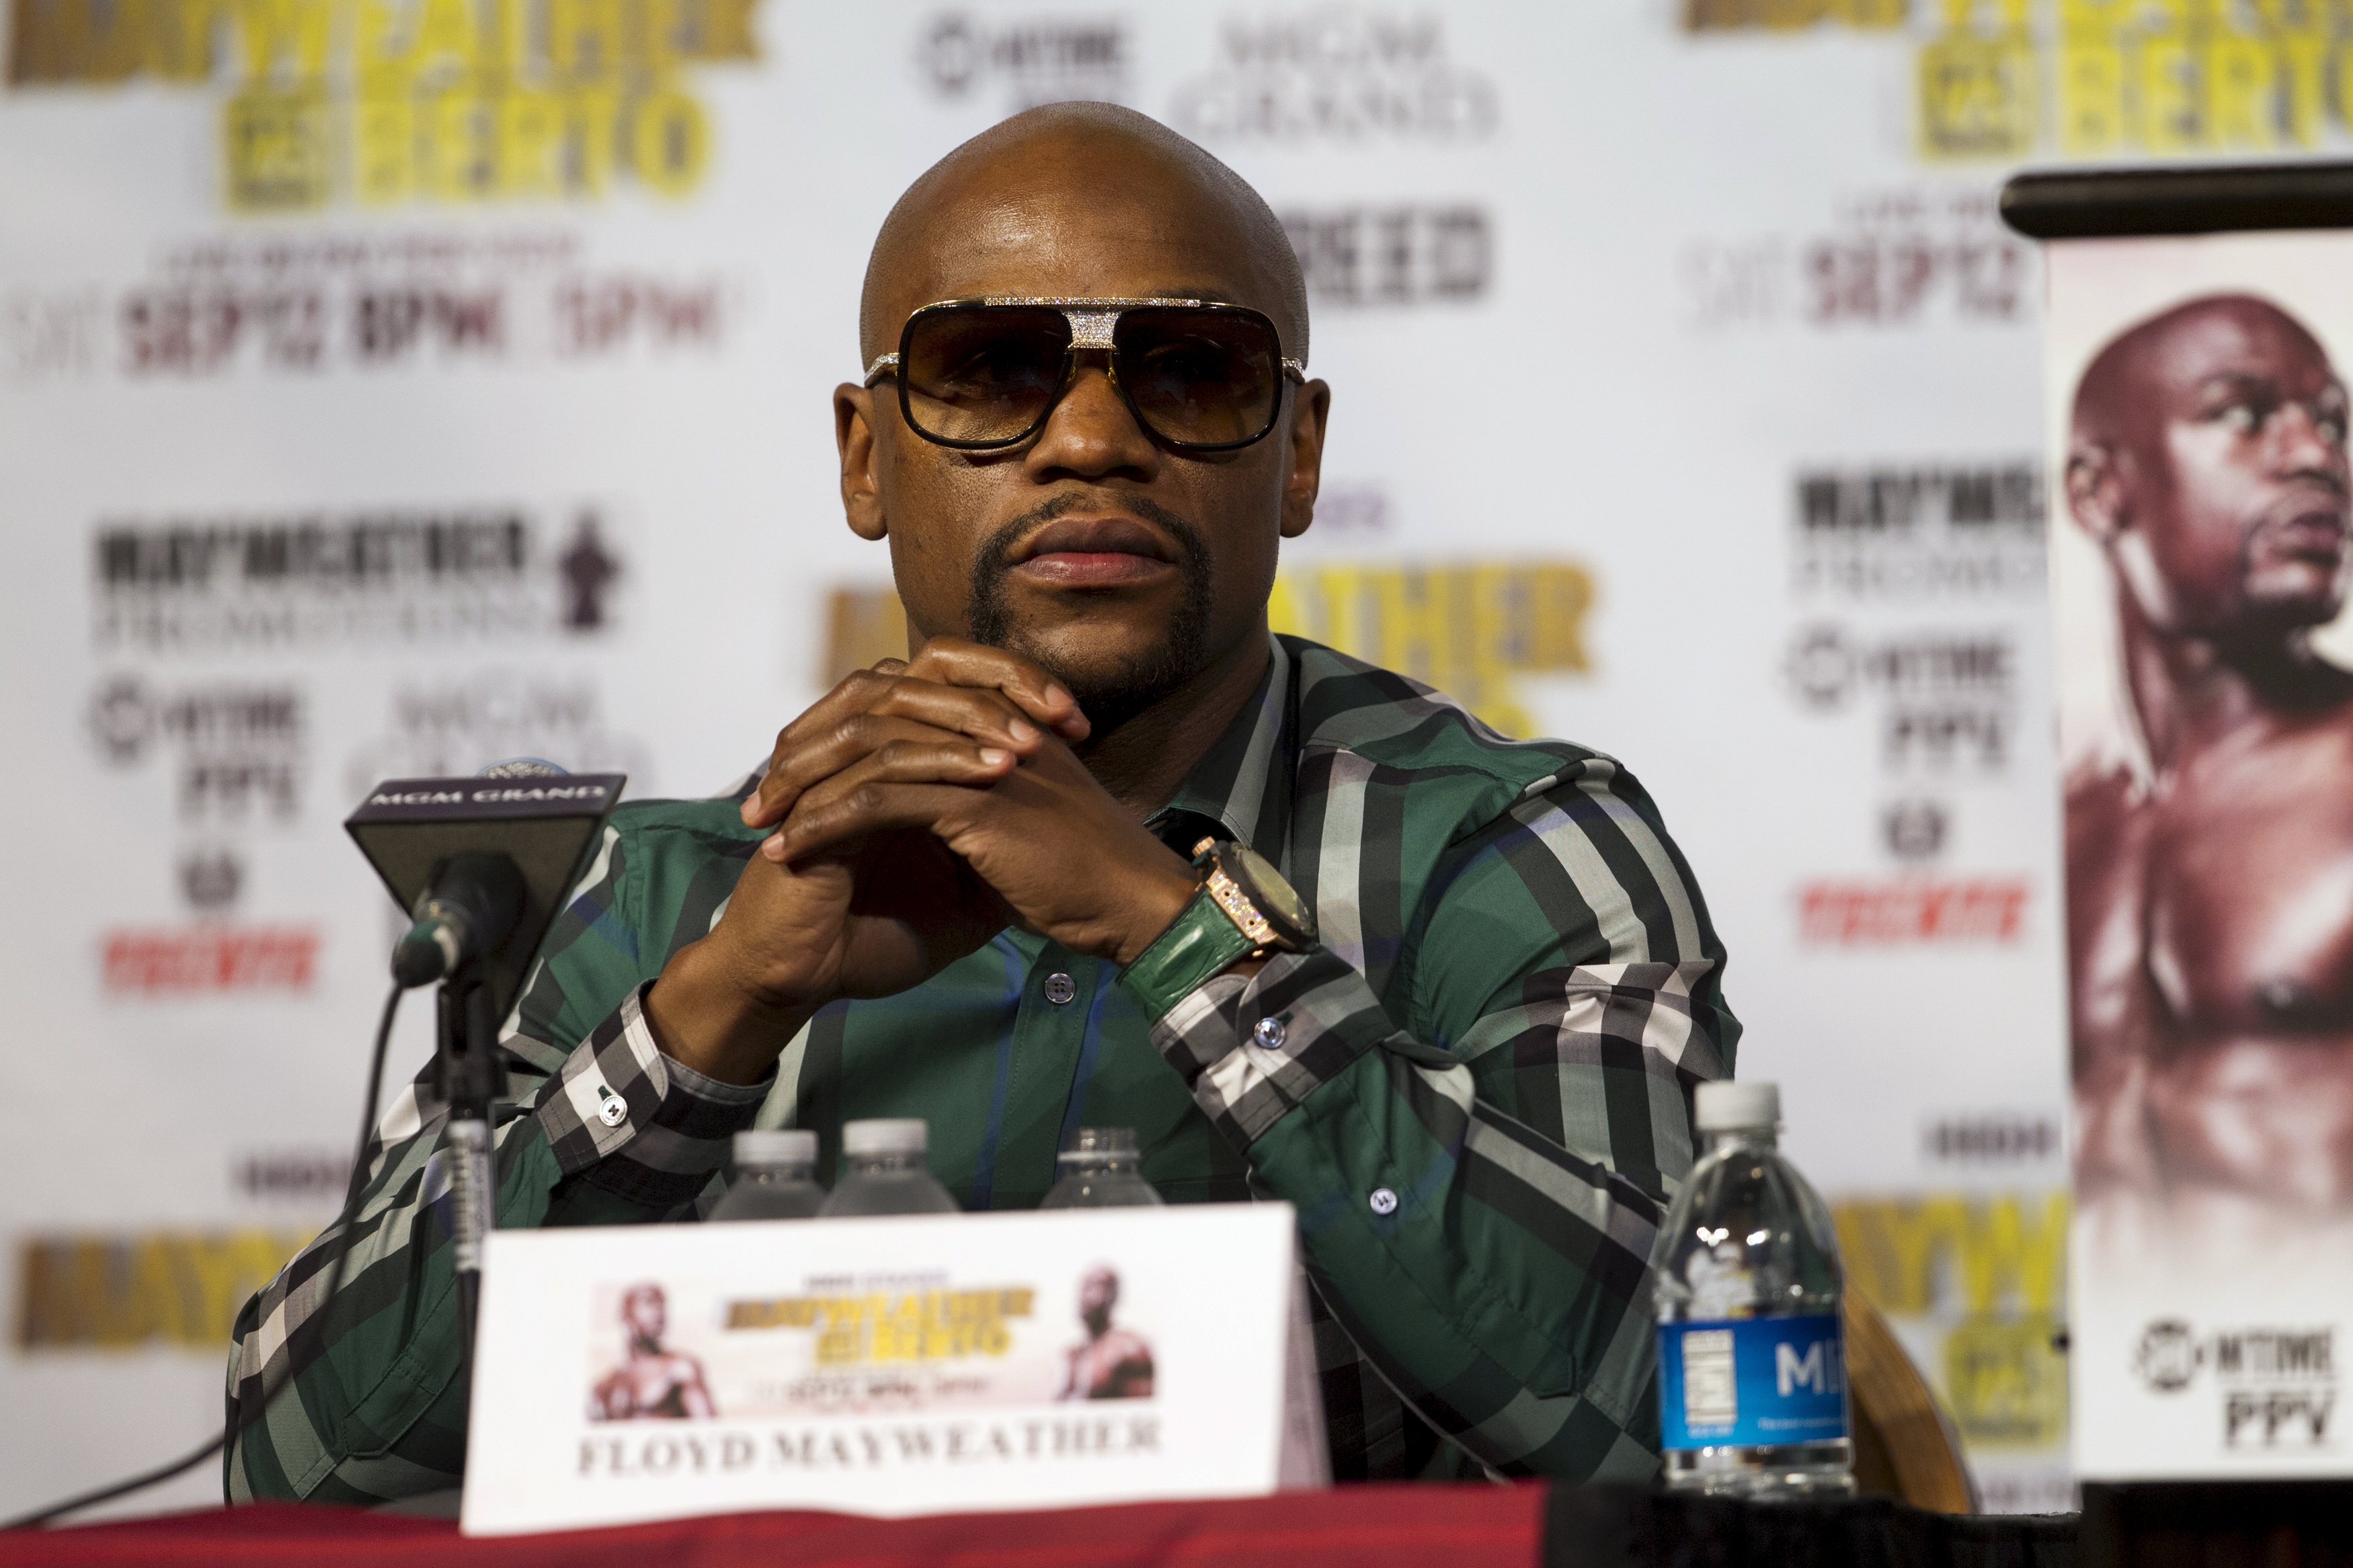 Undefeated WBC/WBA welterweight champion Floyd Mayweather Jr. attends a news conference at MGM Grand Hotel &amp; Casino in Las Vegas September 9, 2015. Mayweather will defend his titles against challenger Andre Berto at the MGM Grand Garden Arena on Sept. 12 in what he says will be his final fight. REUTERS/Las VegasSun/Steve Marcus